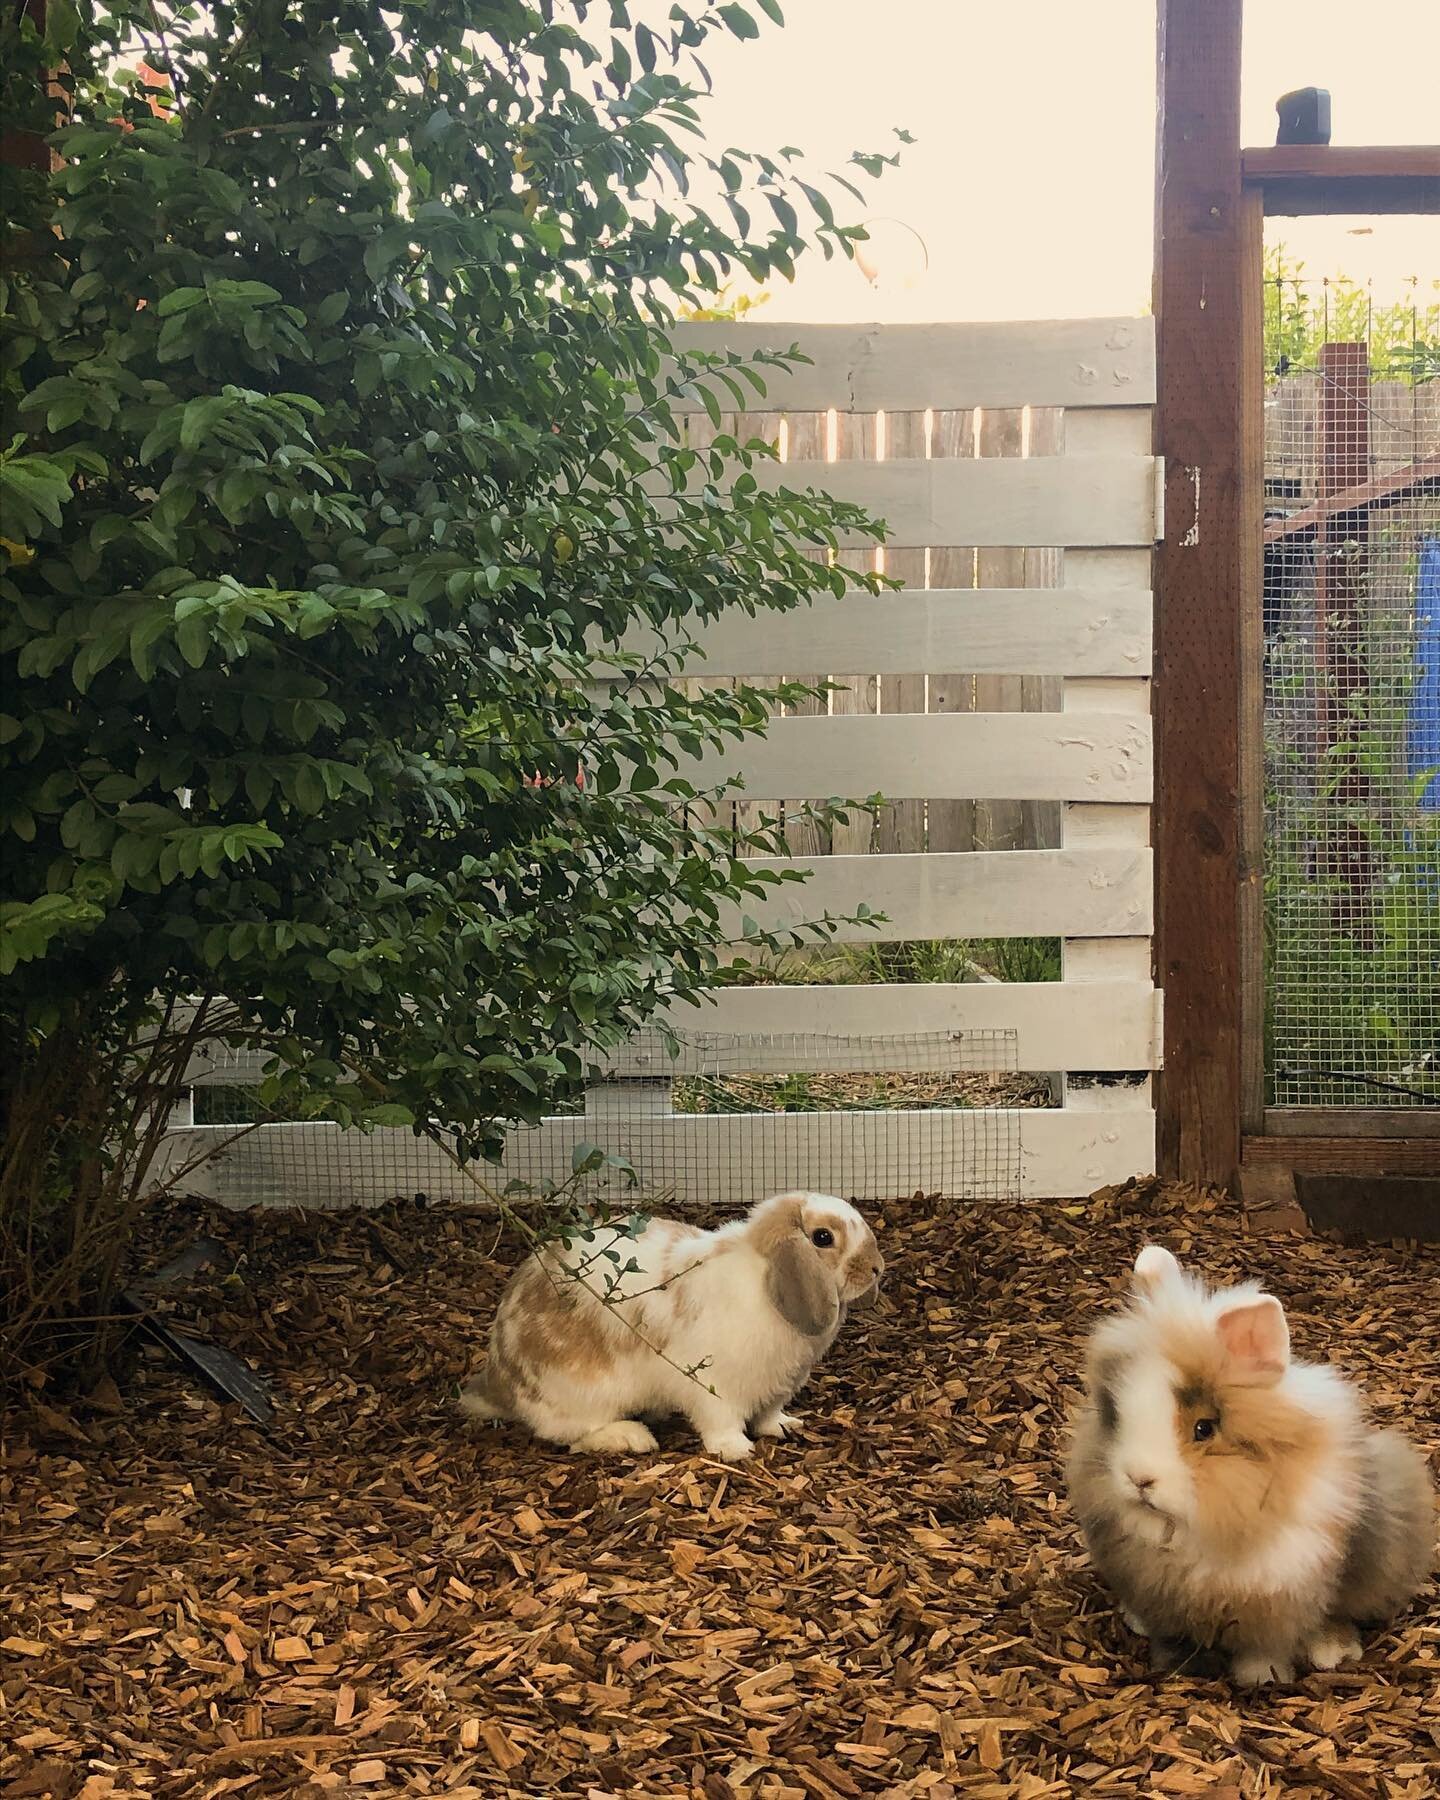 Happy International Women&rsquo;s Day💞 It's time to shine the spotlight on all my ladies in our rabbitry💫

We're so grateful to have eight beautiful mama rabbits with us, and also let&rsquo;s highlight the rabbitry they're from🤩
Our rabbitry start